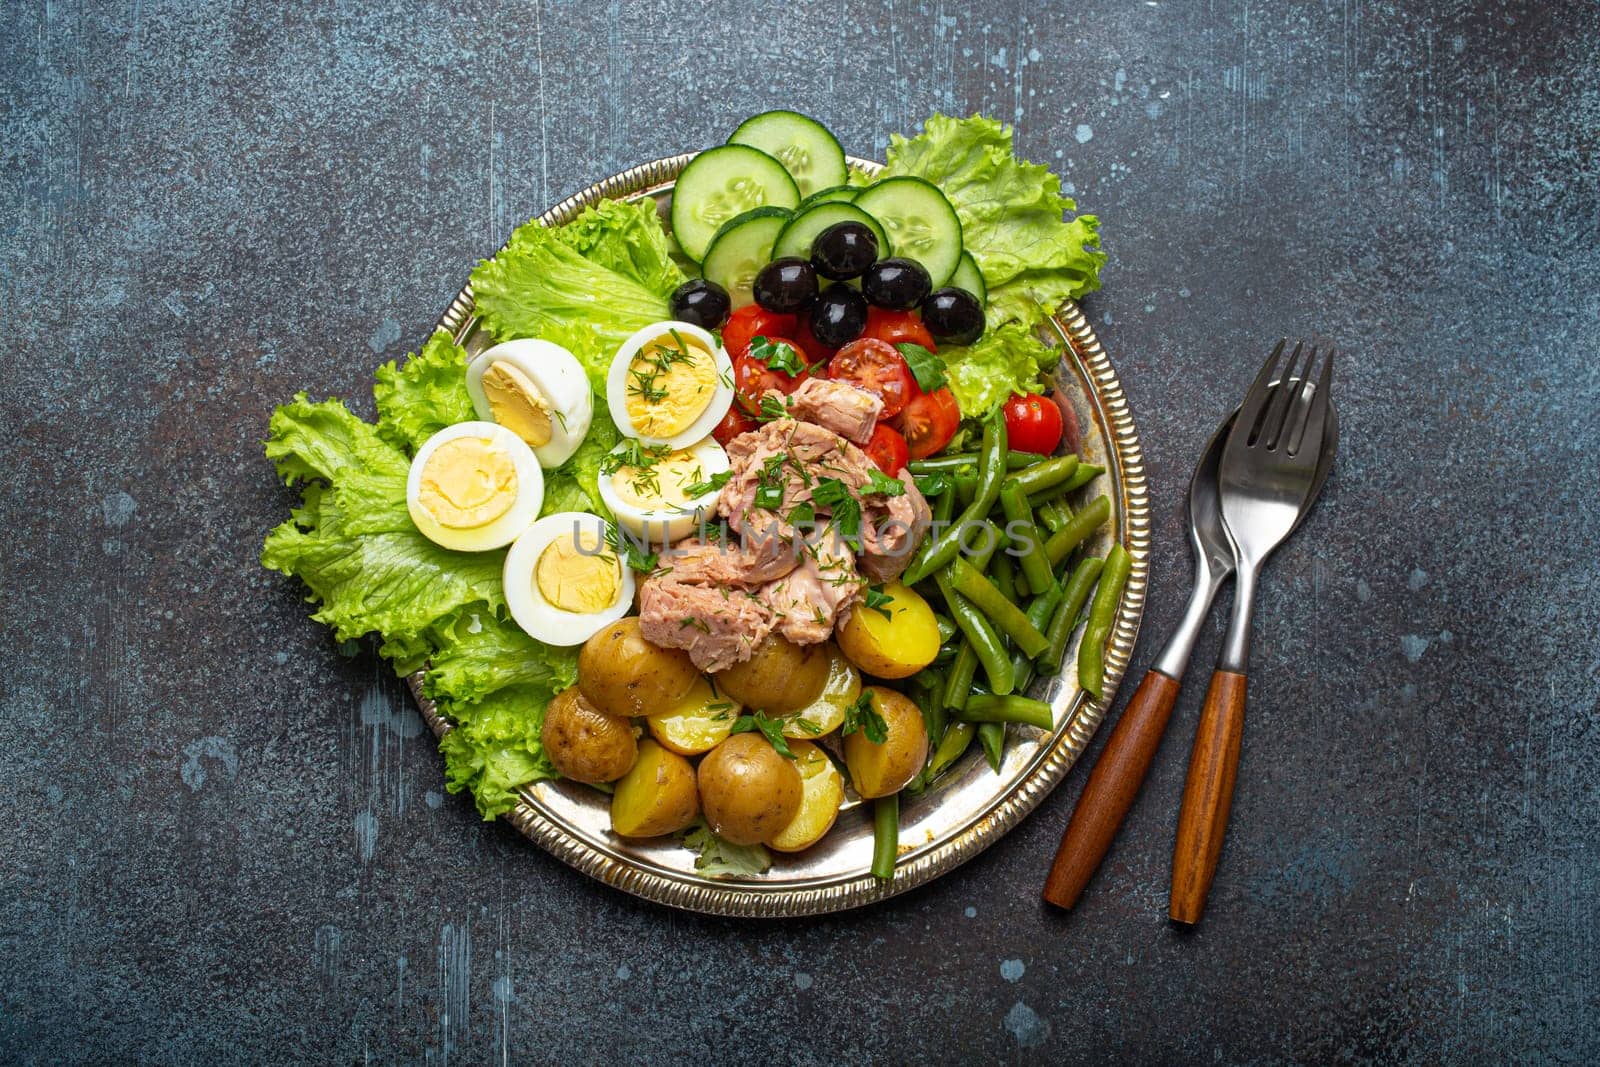 Classic French Nicoise salad with tuna, eggs, potatoes, green beans and olives on a silver platter